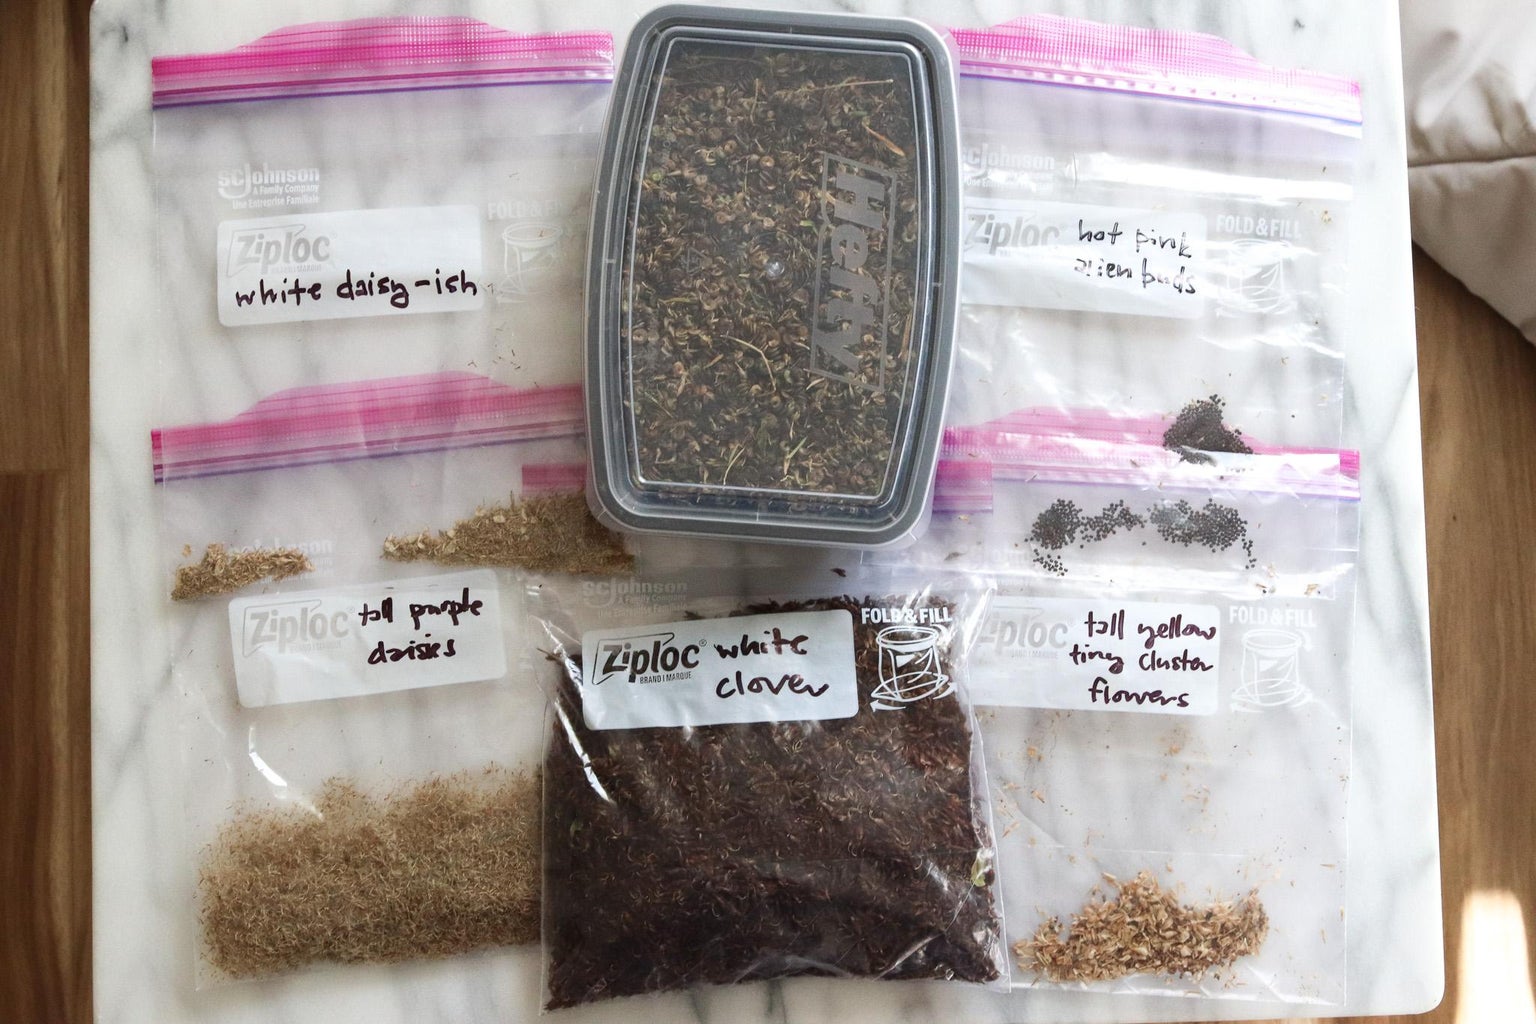 How to Store Your Seeds